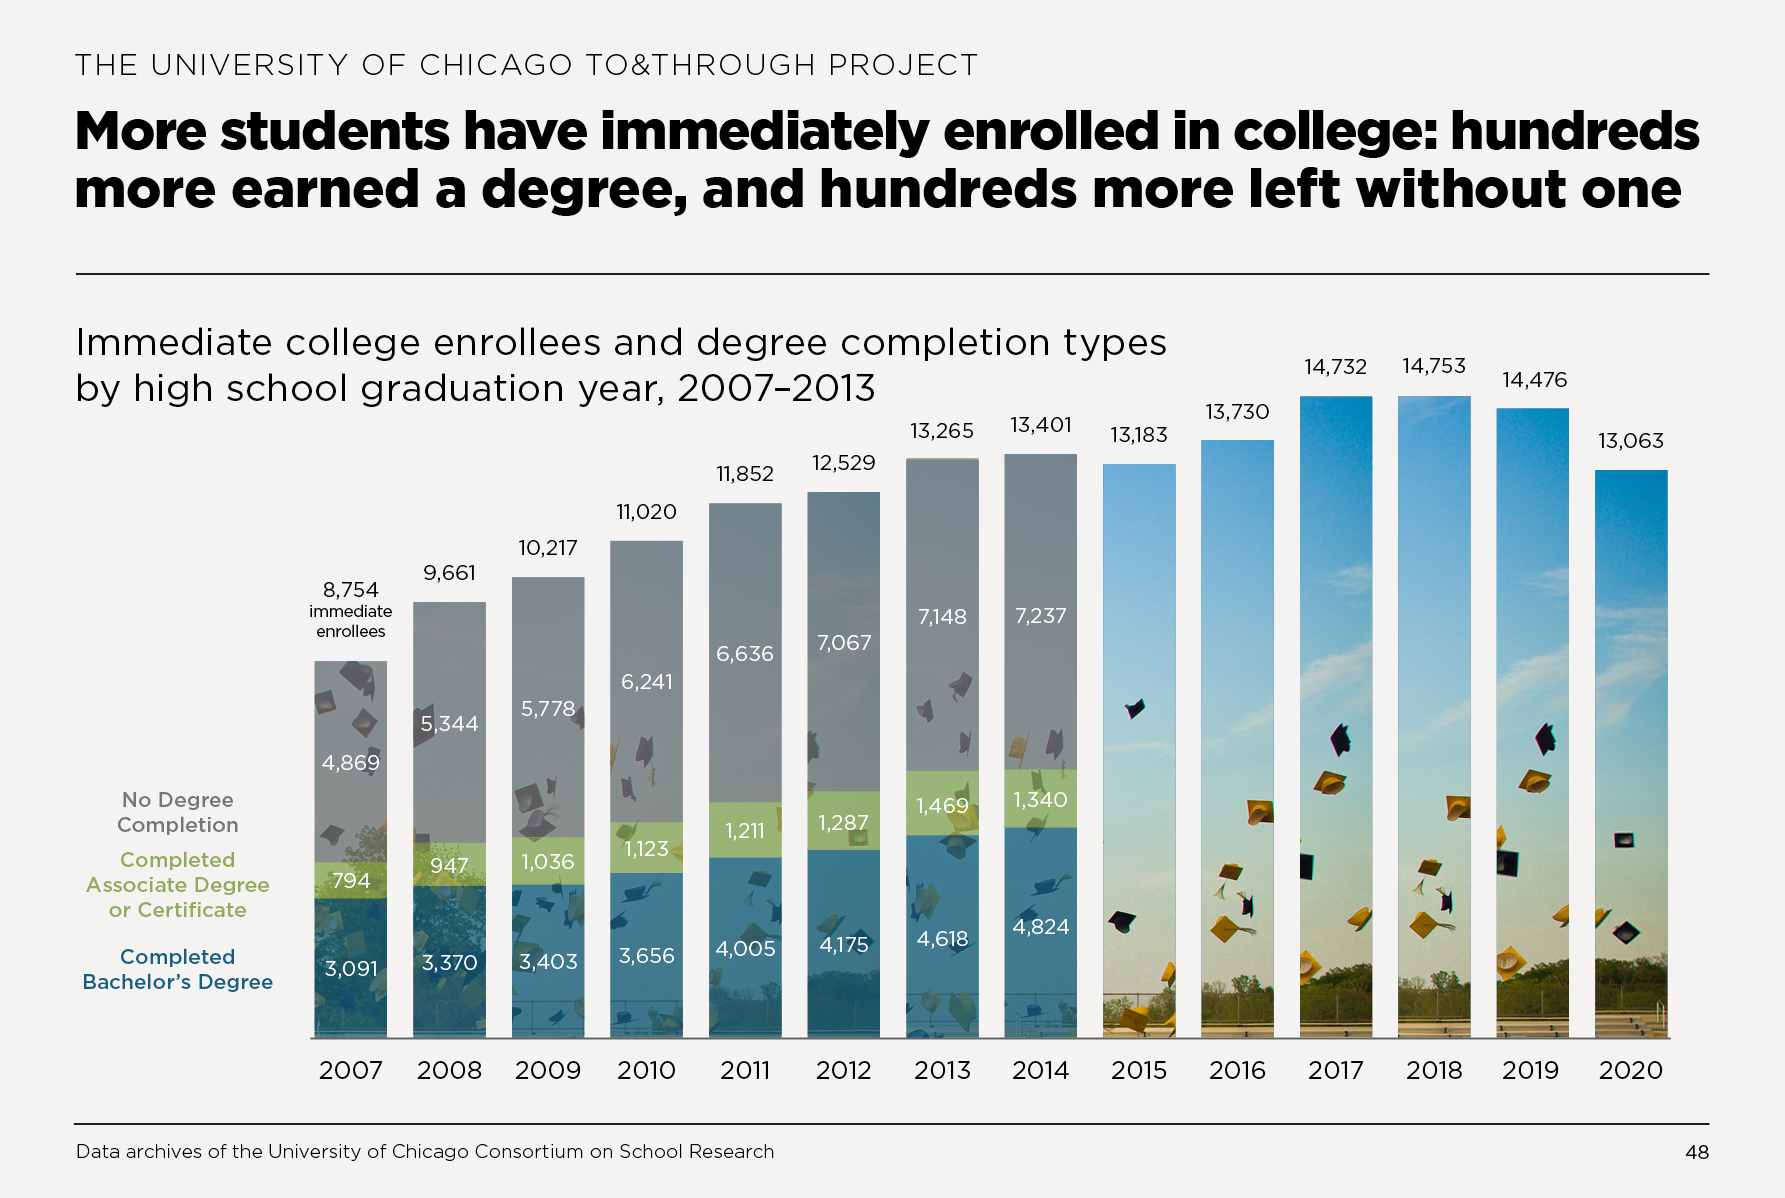 More students have immediately enrolled in college: hundreds more earned a degree, and hundreds more left without one